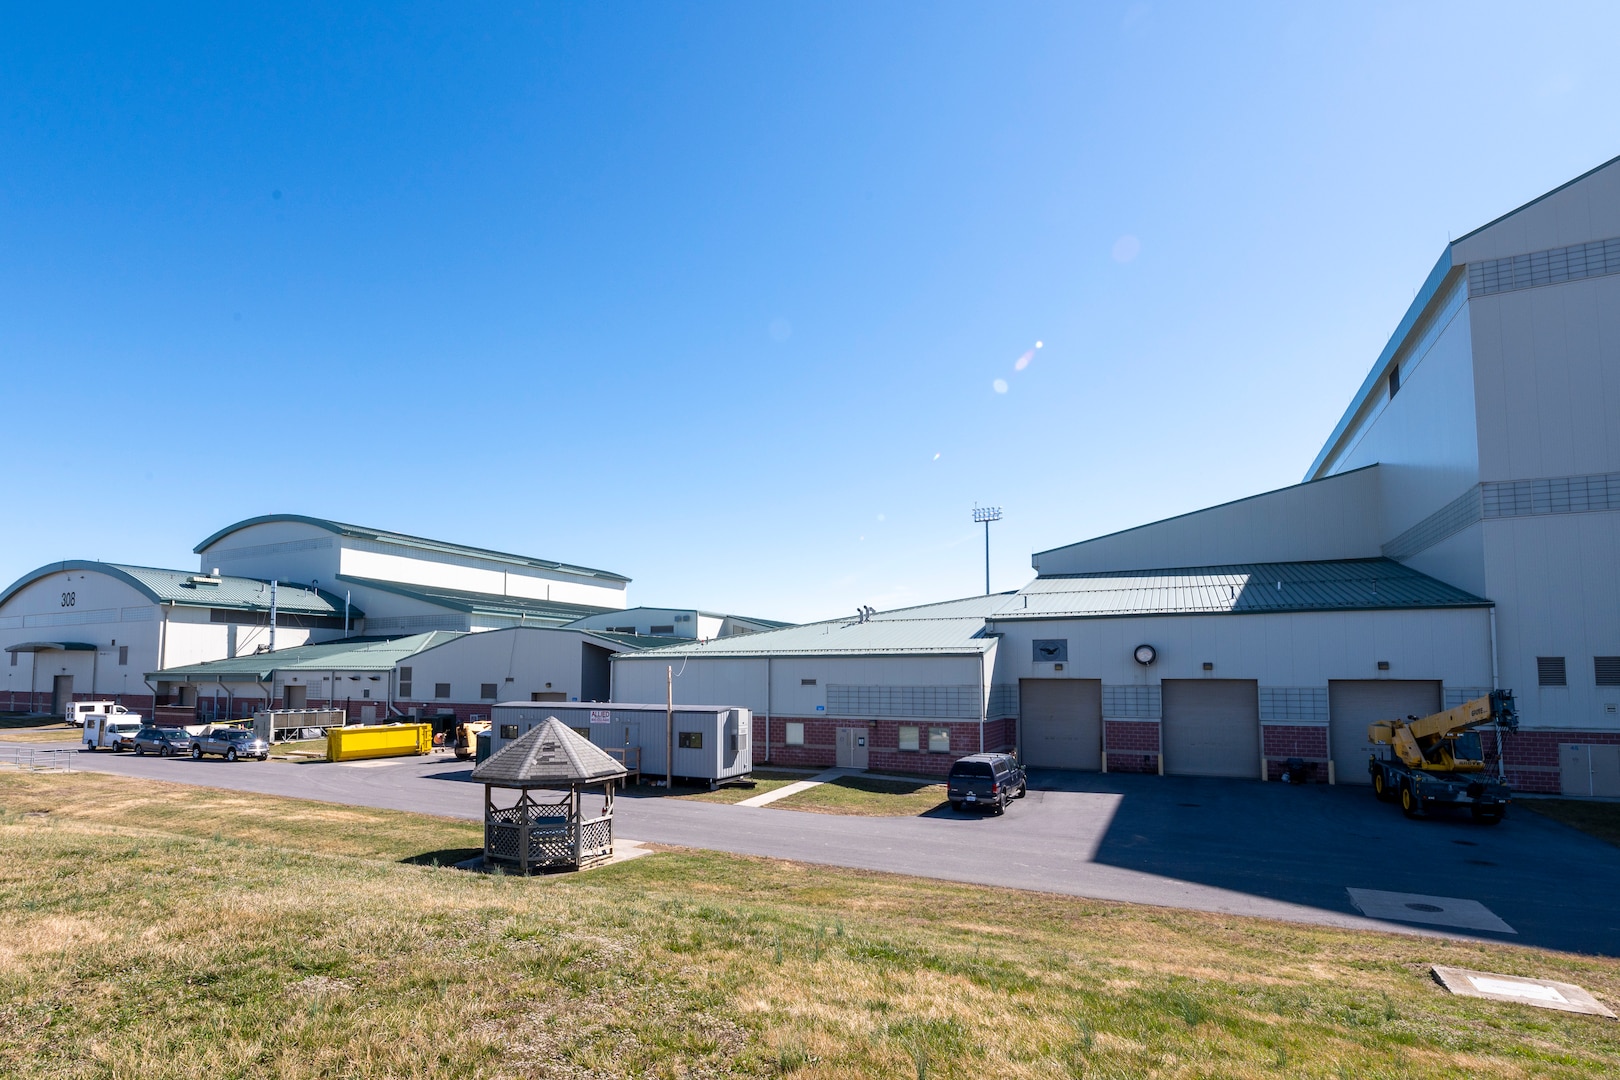 Renovations to 167th Maintenance Group facilities are underway to consolidate maintenance functions on the first floor and relocate the 167th Operations Group to the second story of the building, to right-size the Martinsburg, West Virginia, air base.